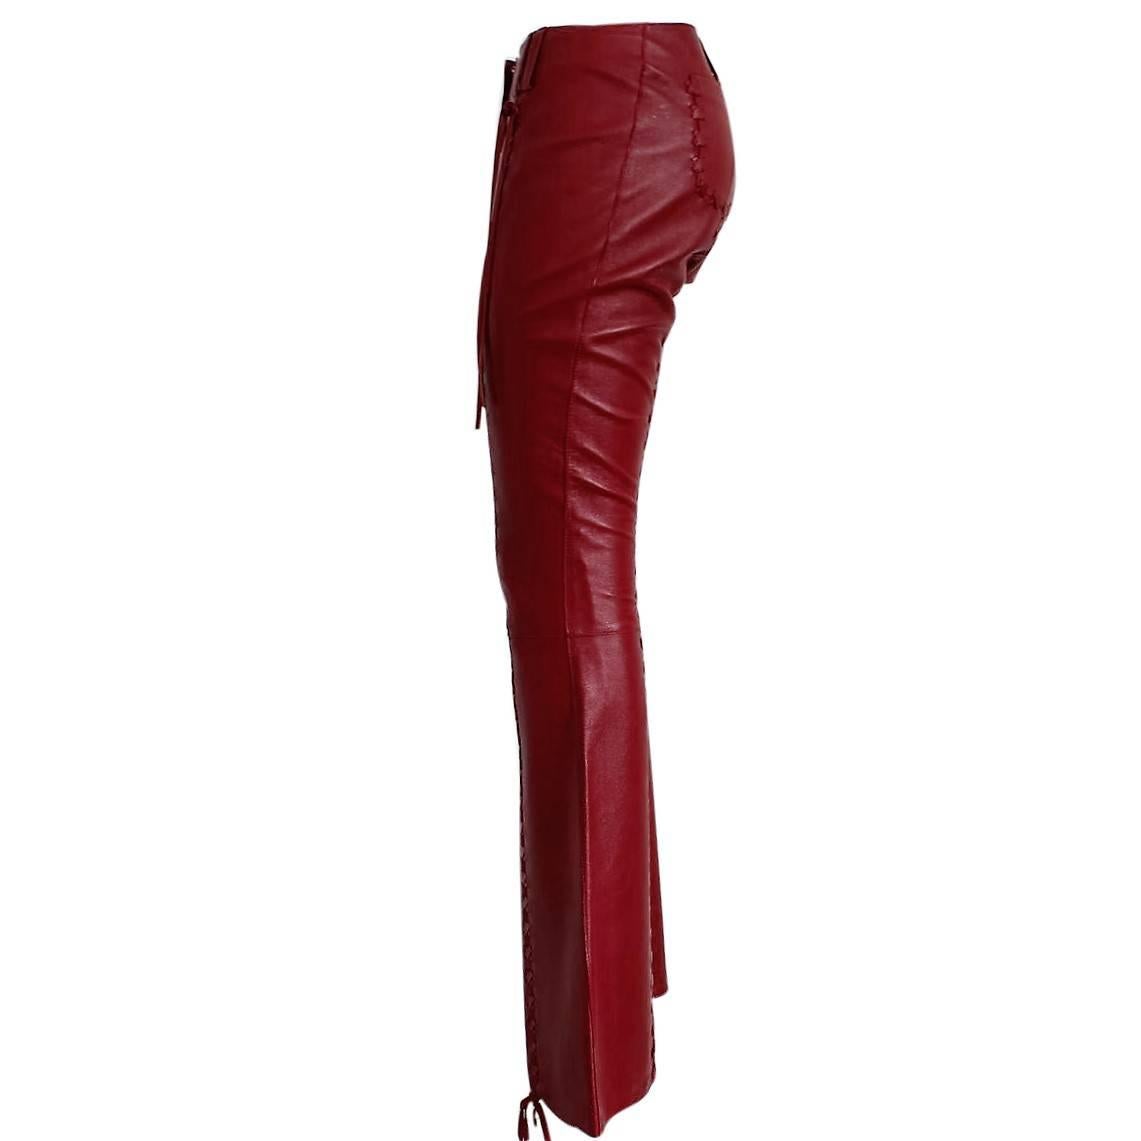 Fantastic leather pants by Dolce & Gabbana
Very exclusive
Top quality leather
Red cherry color
Beautiful crossed strings of leather that follow the leg
Two back pockets
Large at the bottom
Internal animalier textile
Size italian 40 ( US 4/6)